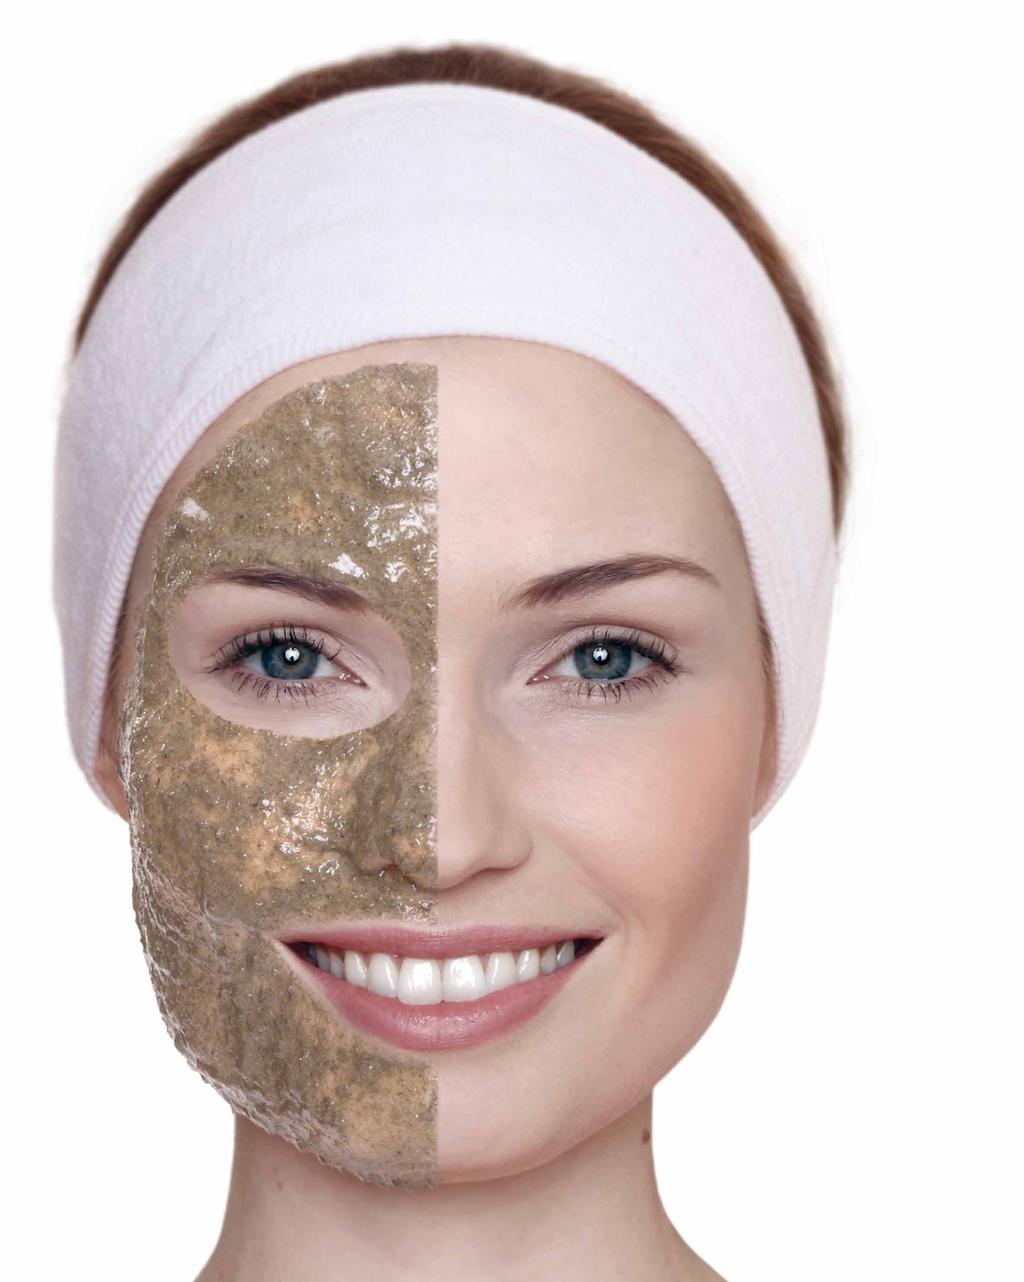 GREEN PEEL The GREEN PEEL A new skin in 5 days. For more than 50 years, the original GREEN PEEL Herbal Peeling Classic helps many people to get their desired skin.